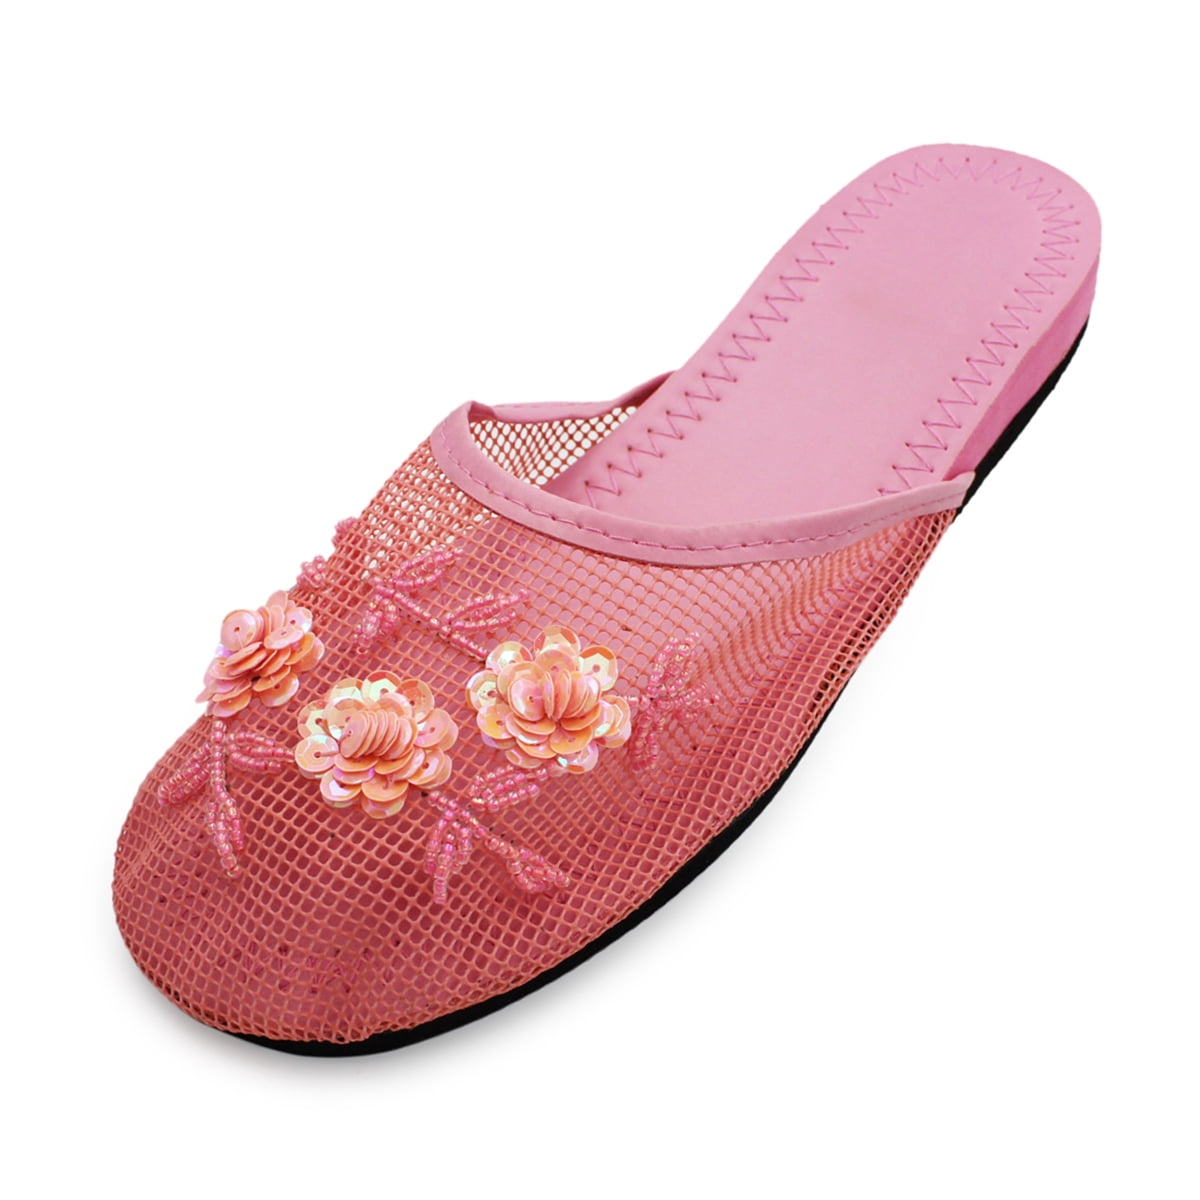 munitie Parana rivier overzee LAVRA Women's Mesh Sequin Slide Beaded Chinese Slippers Floral Embellished  Shoes - Walmart.com